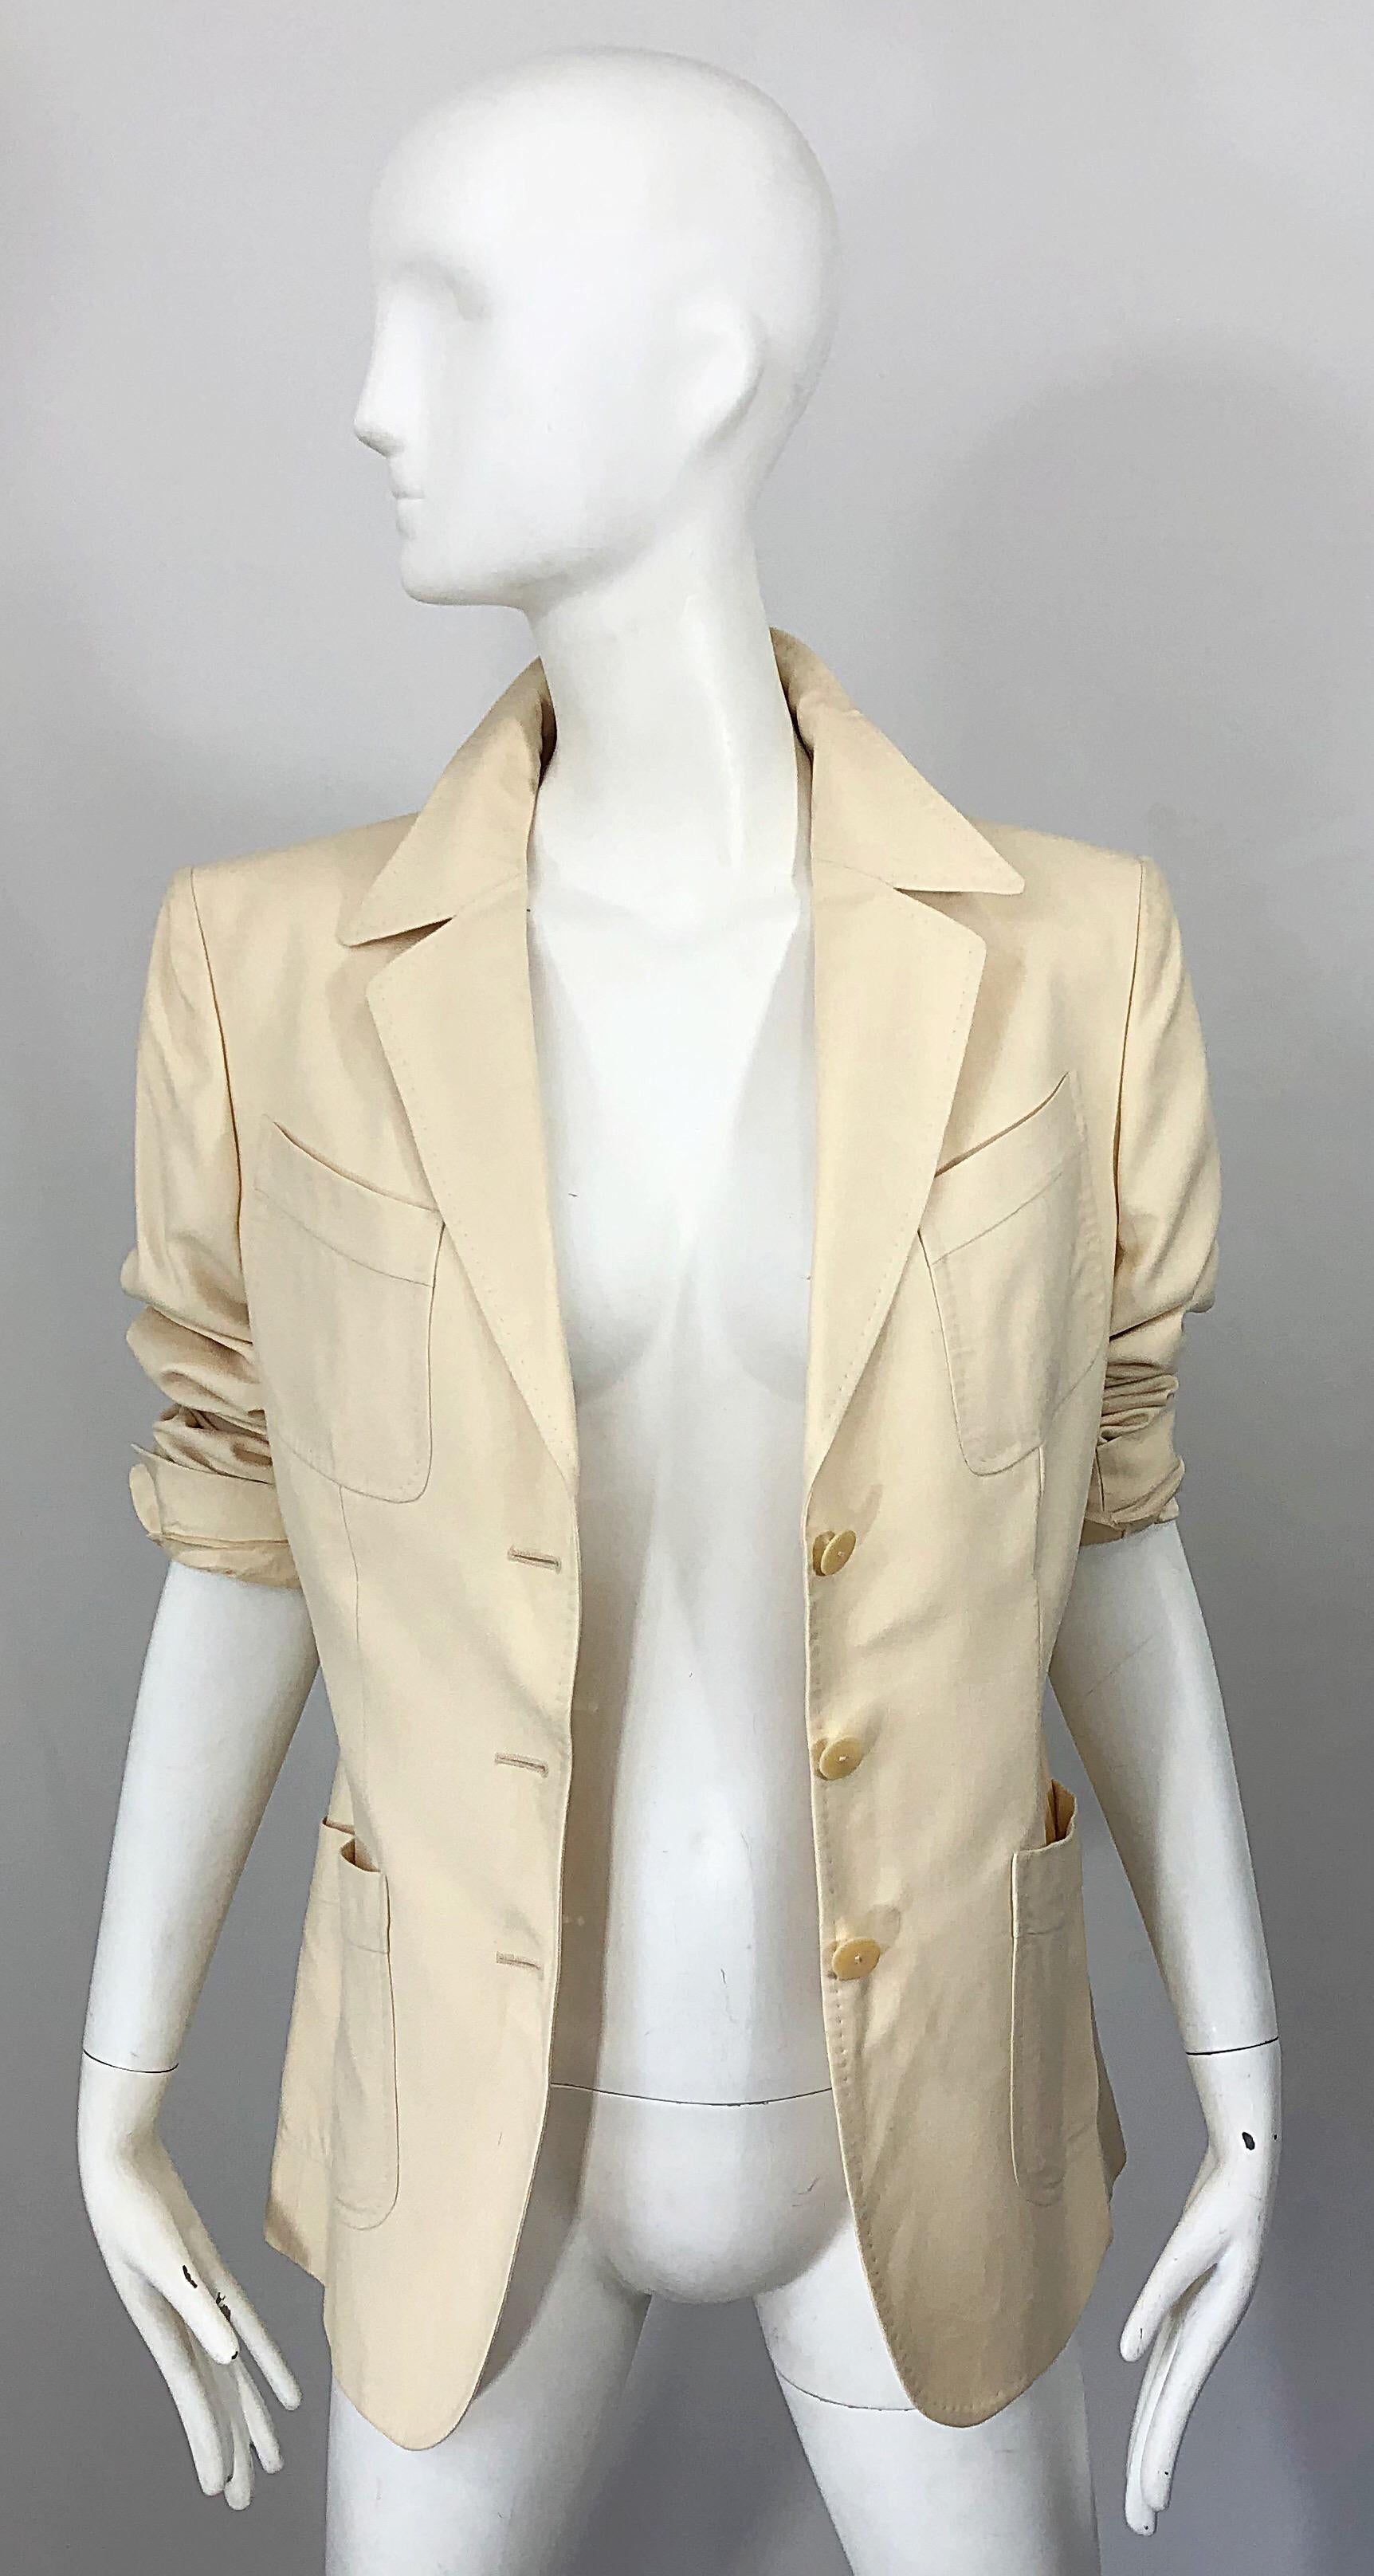 Vintage Thierry Mugler Couture 1990s Size 40 / US 8 Ivory Silk 90s Blazer Jacket In Excellent Condition For Sale In San Diego, CA